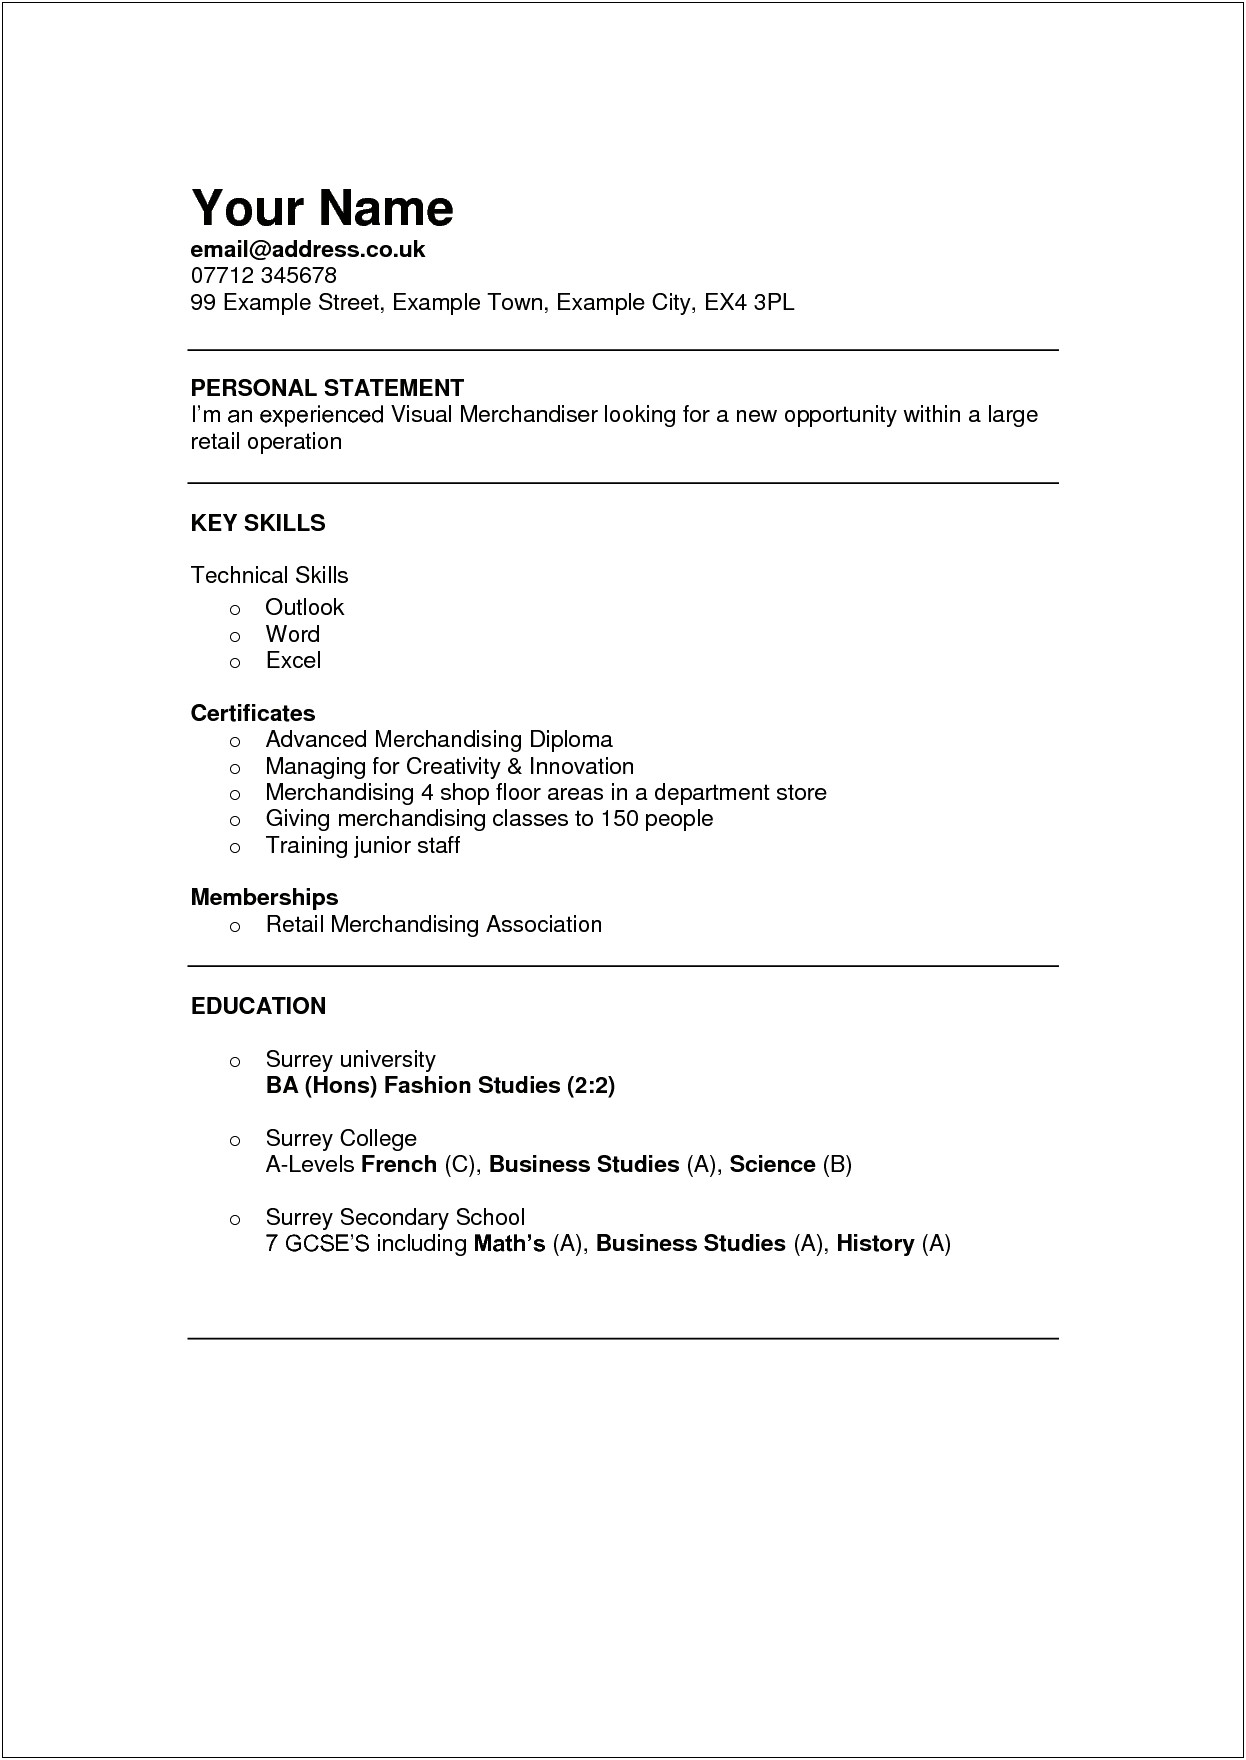 Resume For Degree Students Free Download